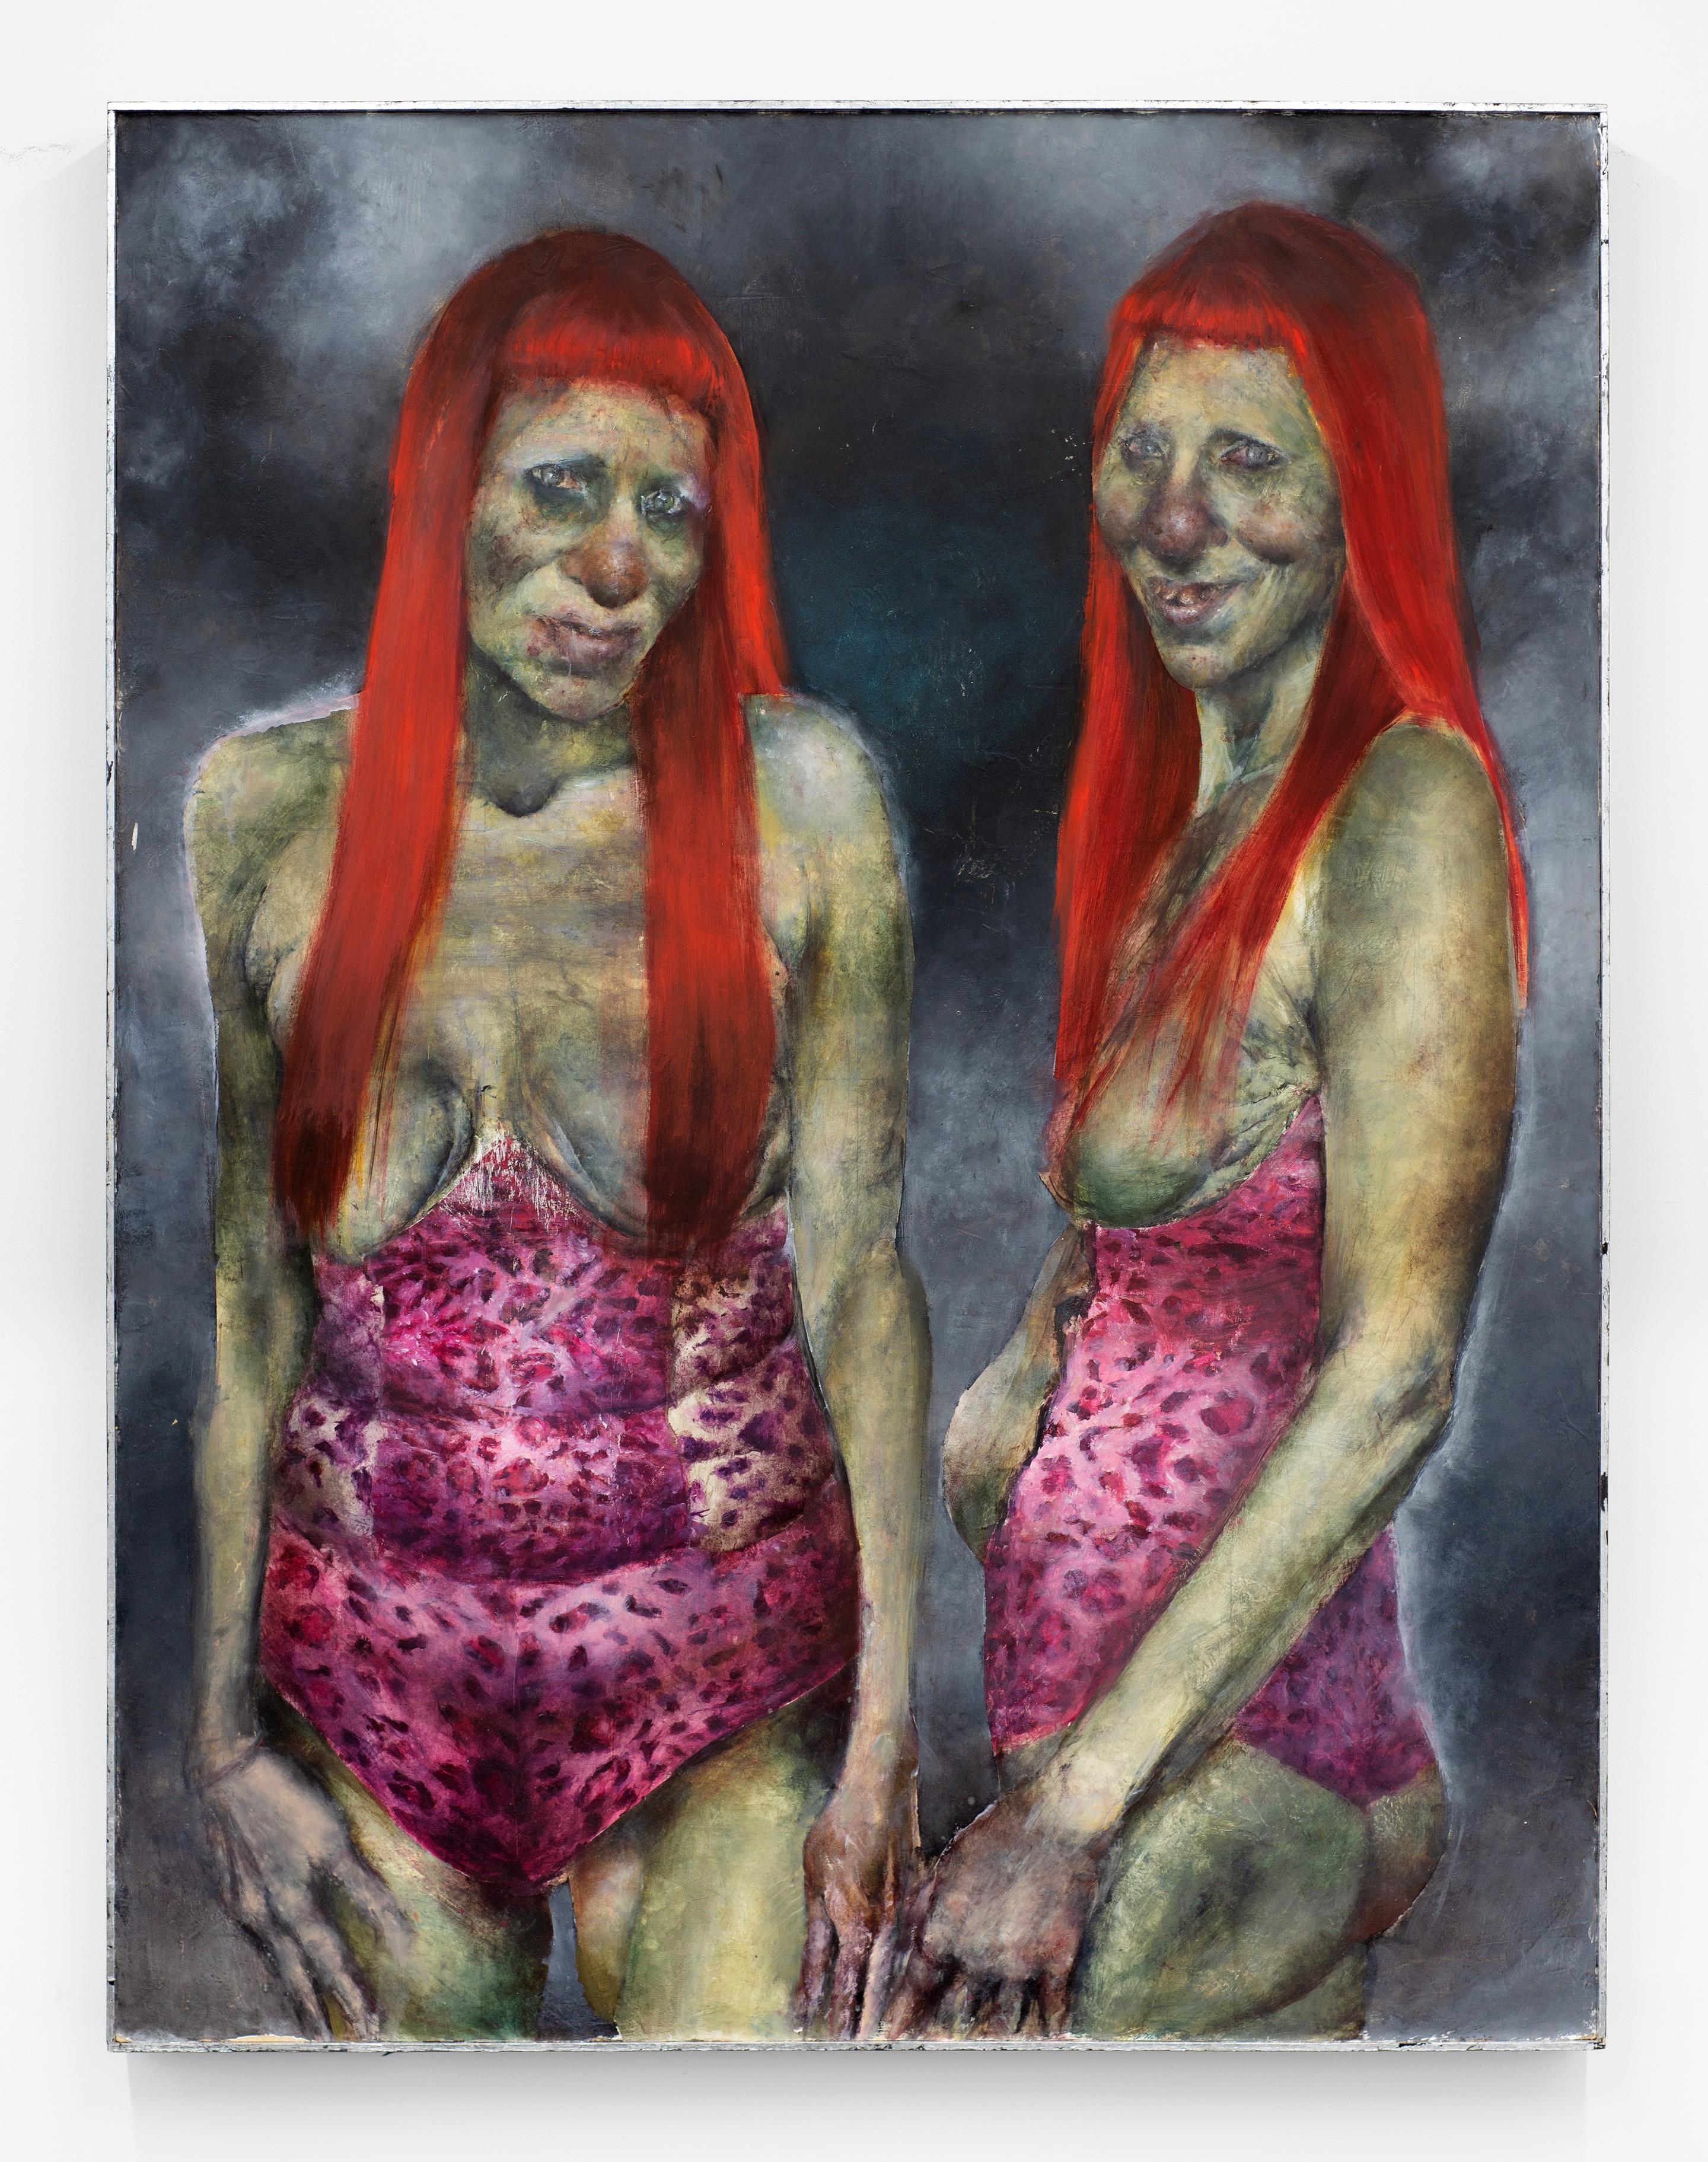 Twins (2022)
Oil on panel with artist's frame
55.5h x 42.5w x 2.75d inches (140.97h x 107.95 x 6.985 cm)